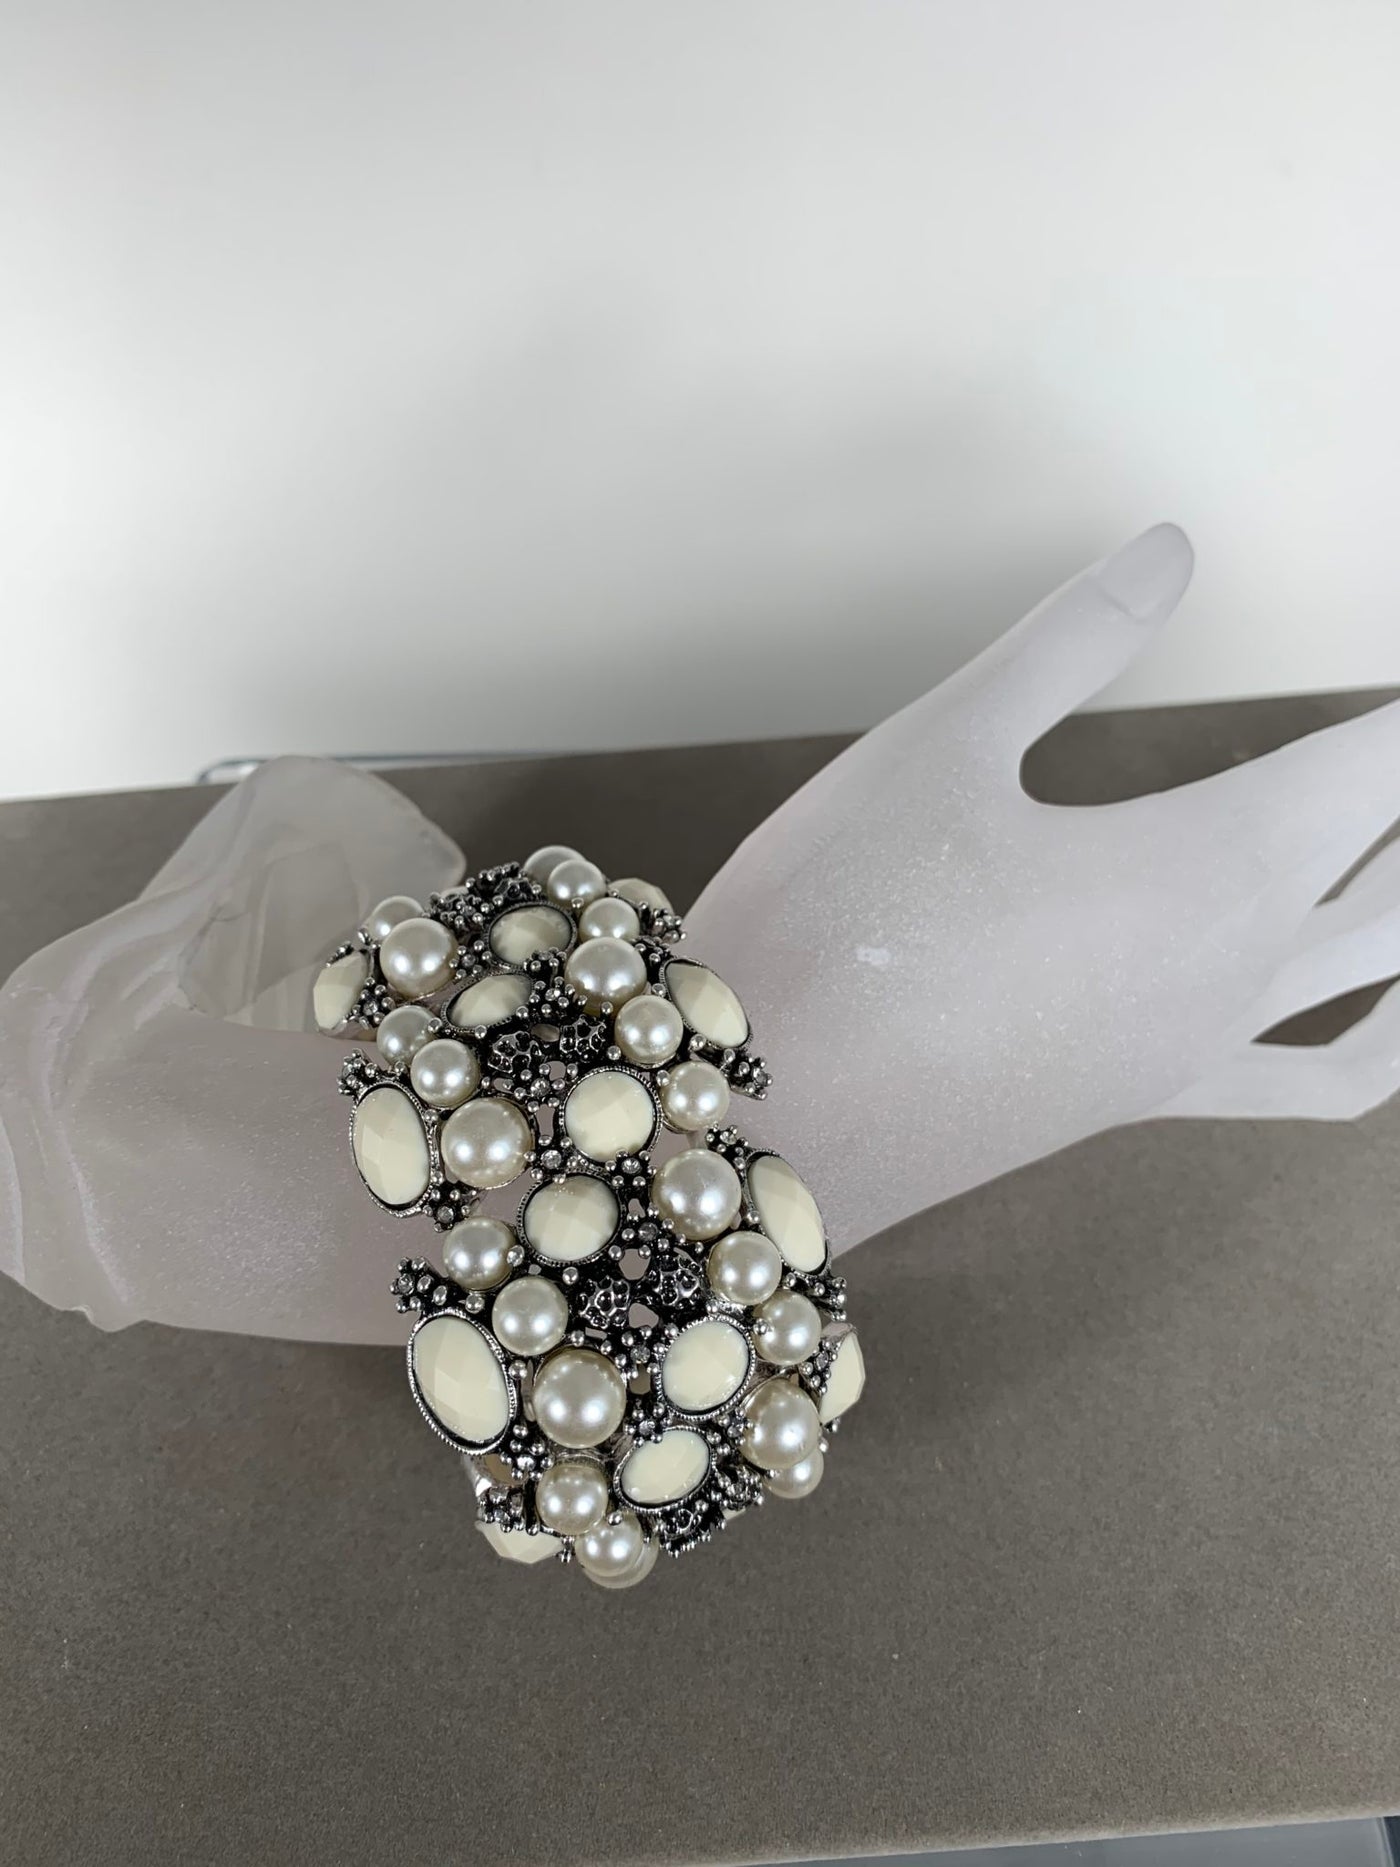 Pearlized Stretchy Bracelet with White Faux Stones